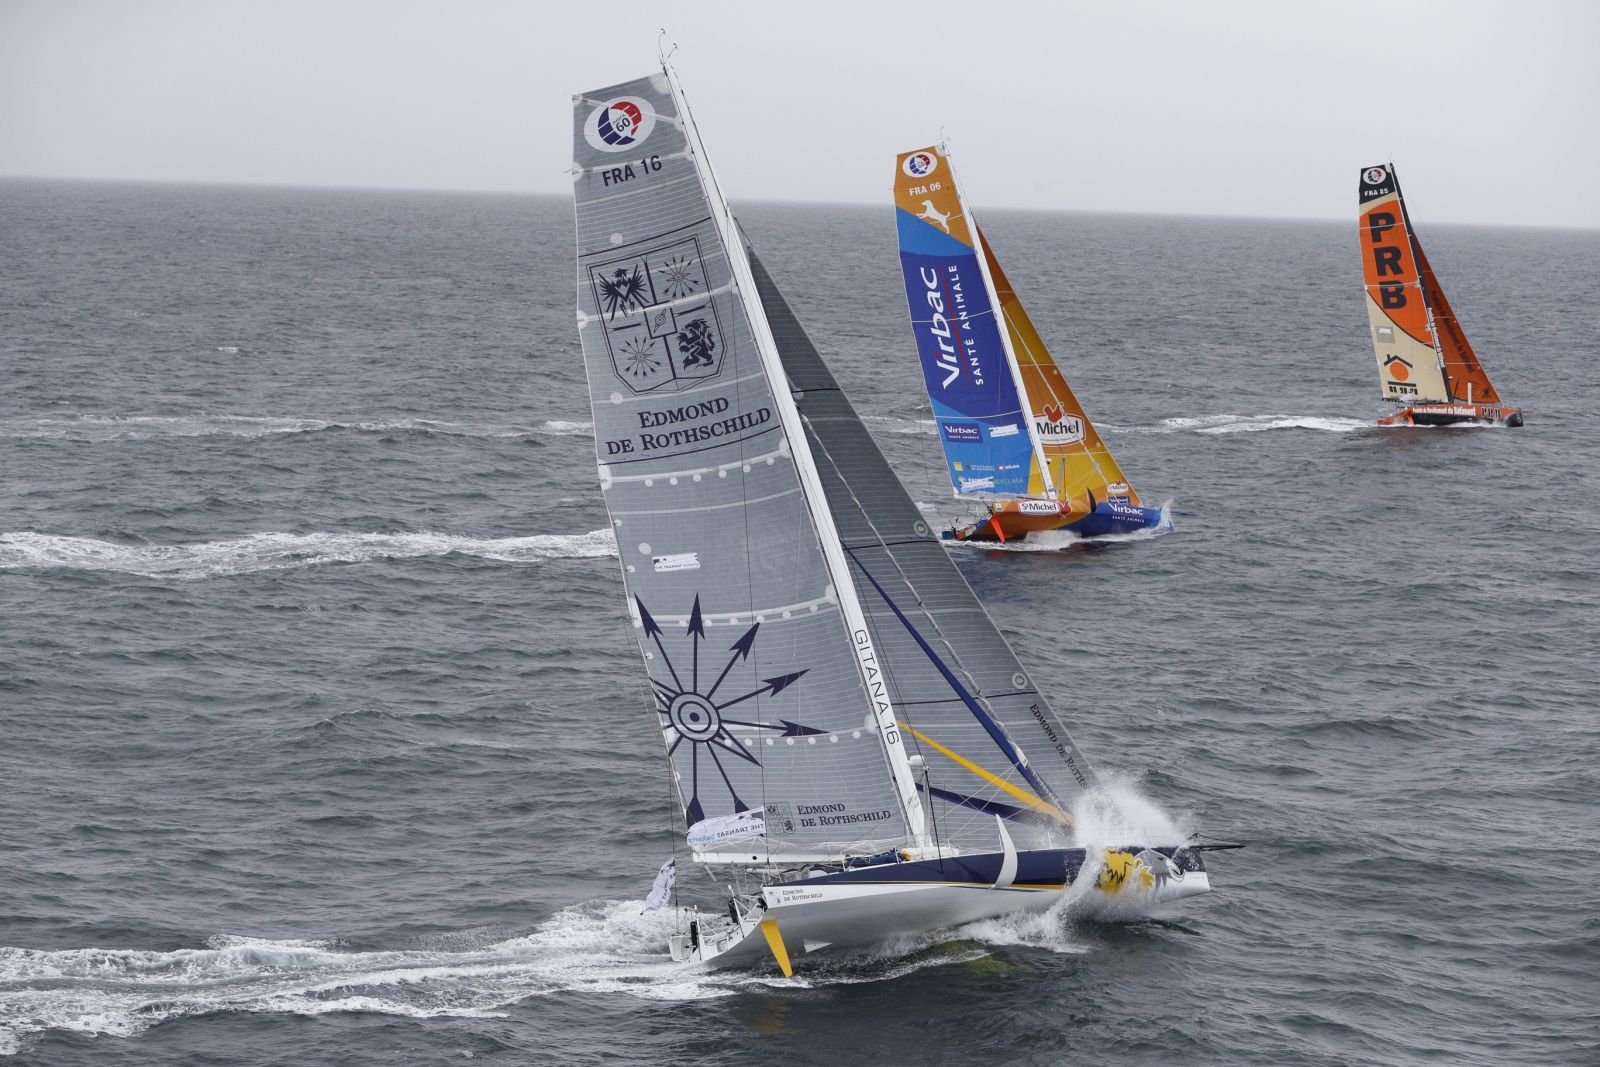 The 60th anniversary edition of the solo sailing race The Transat will begin in Brest, France, at the beginning of May and end later that month in Charleston. The 3,500-mile race can take top sailors as little as eight days to complete. (Photo/Provided)